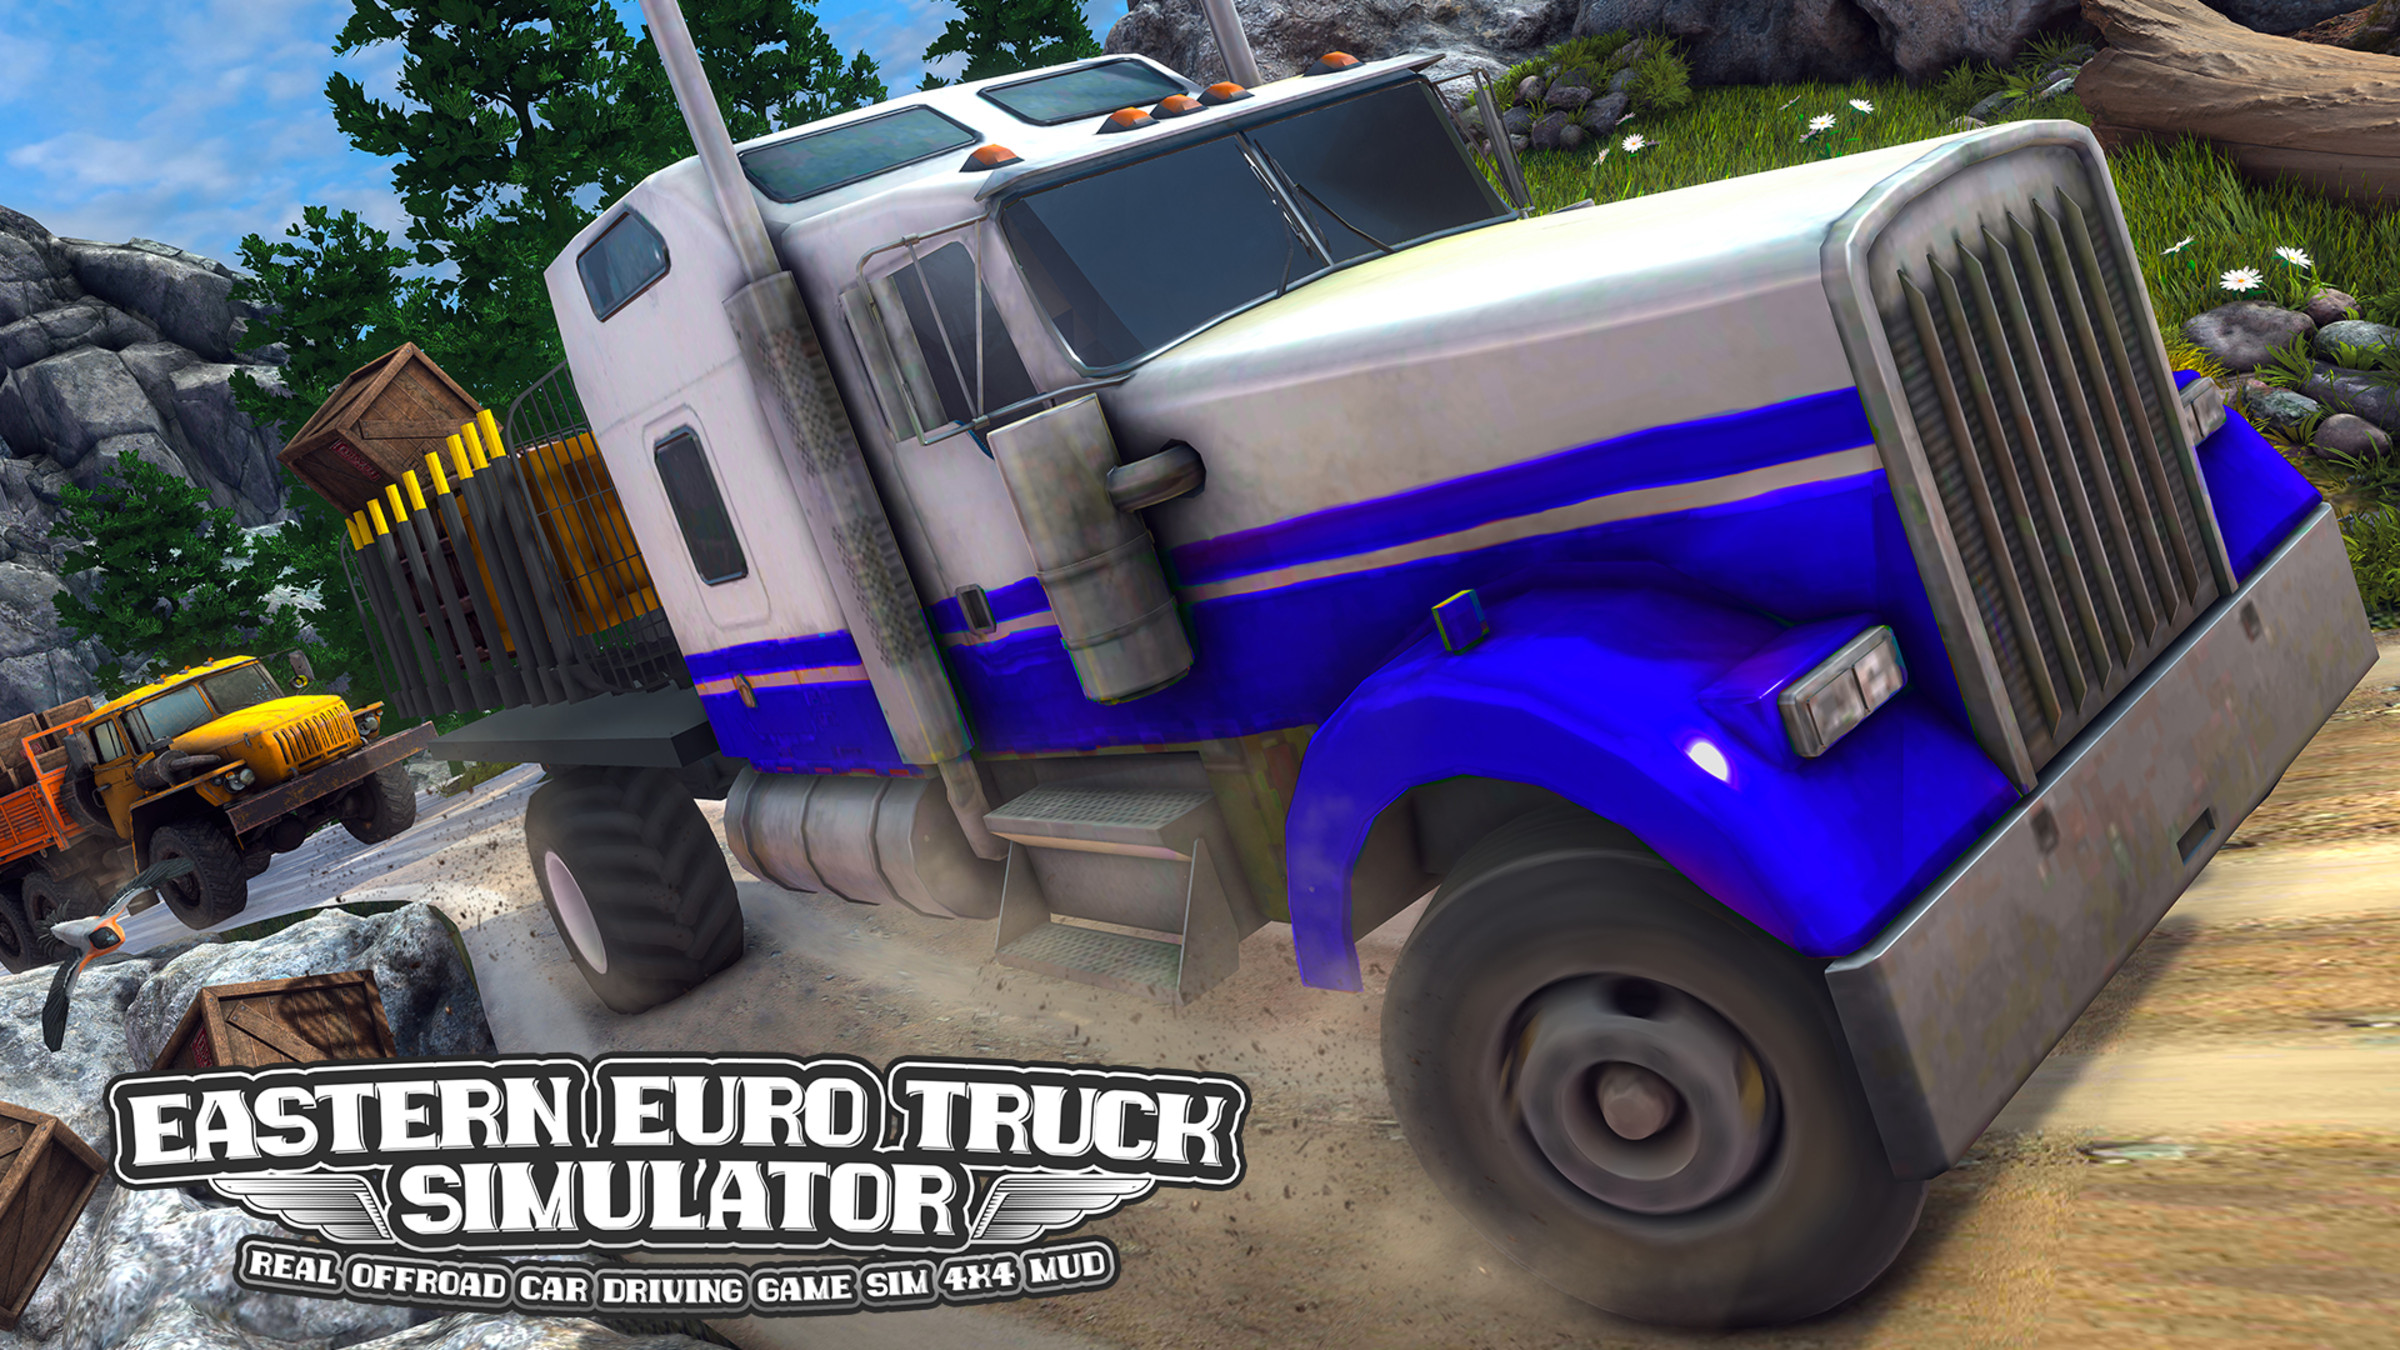 Truck Simulator is 75% off right now (both of them)